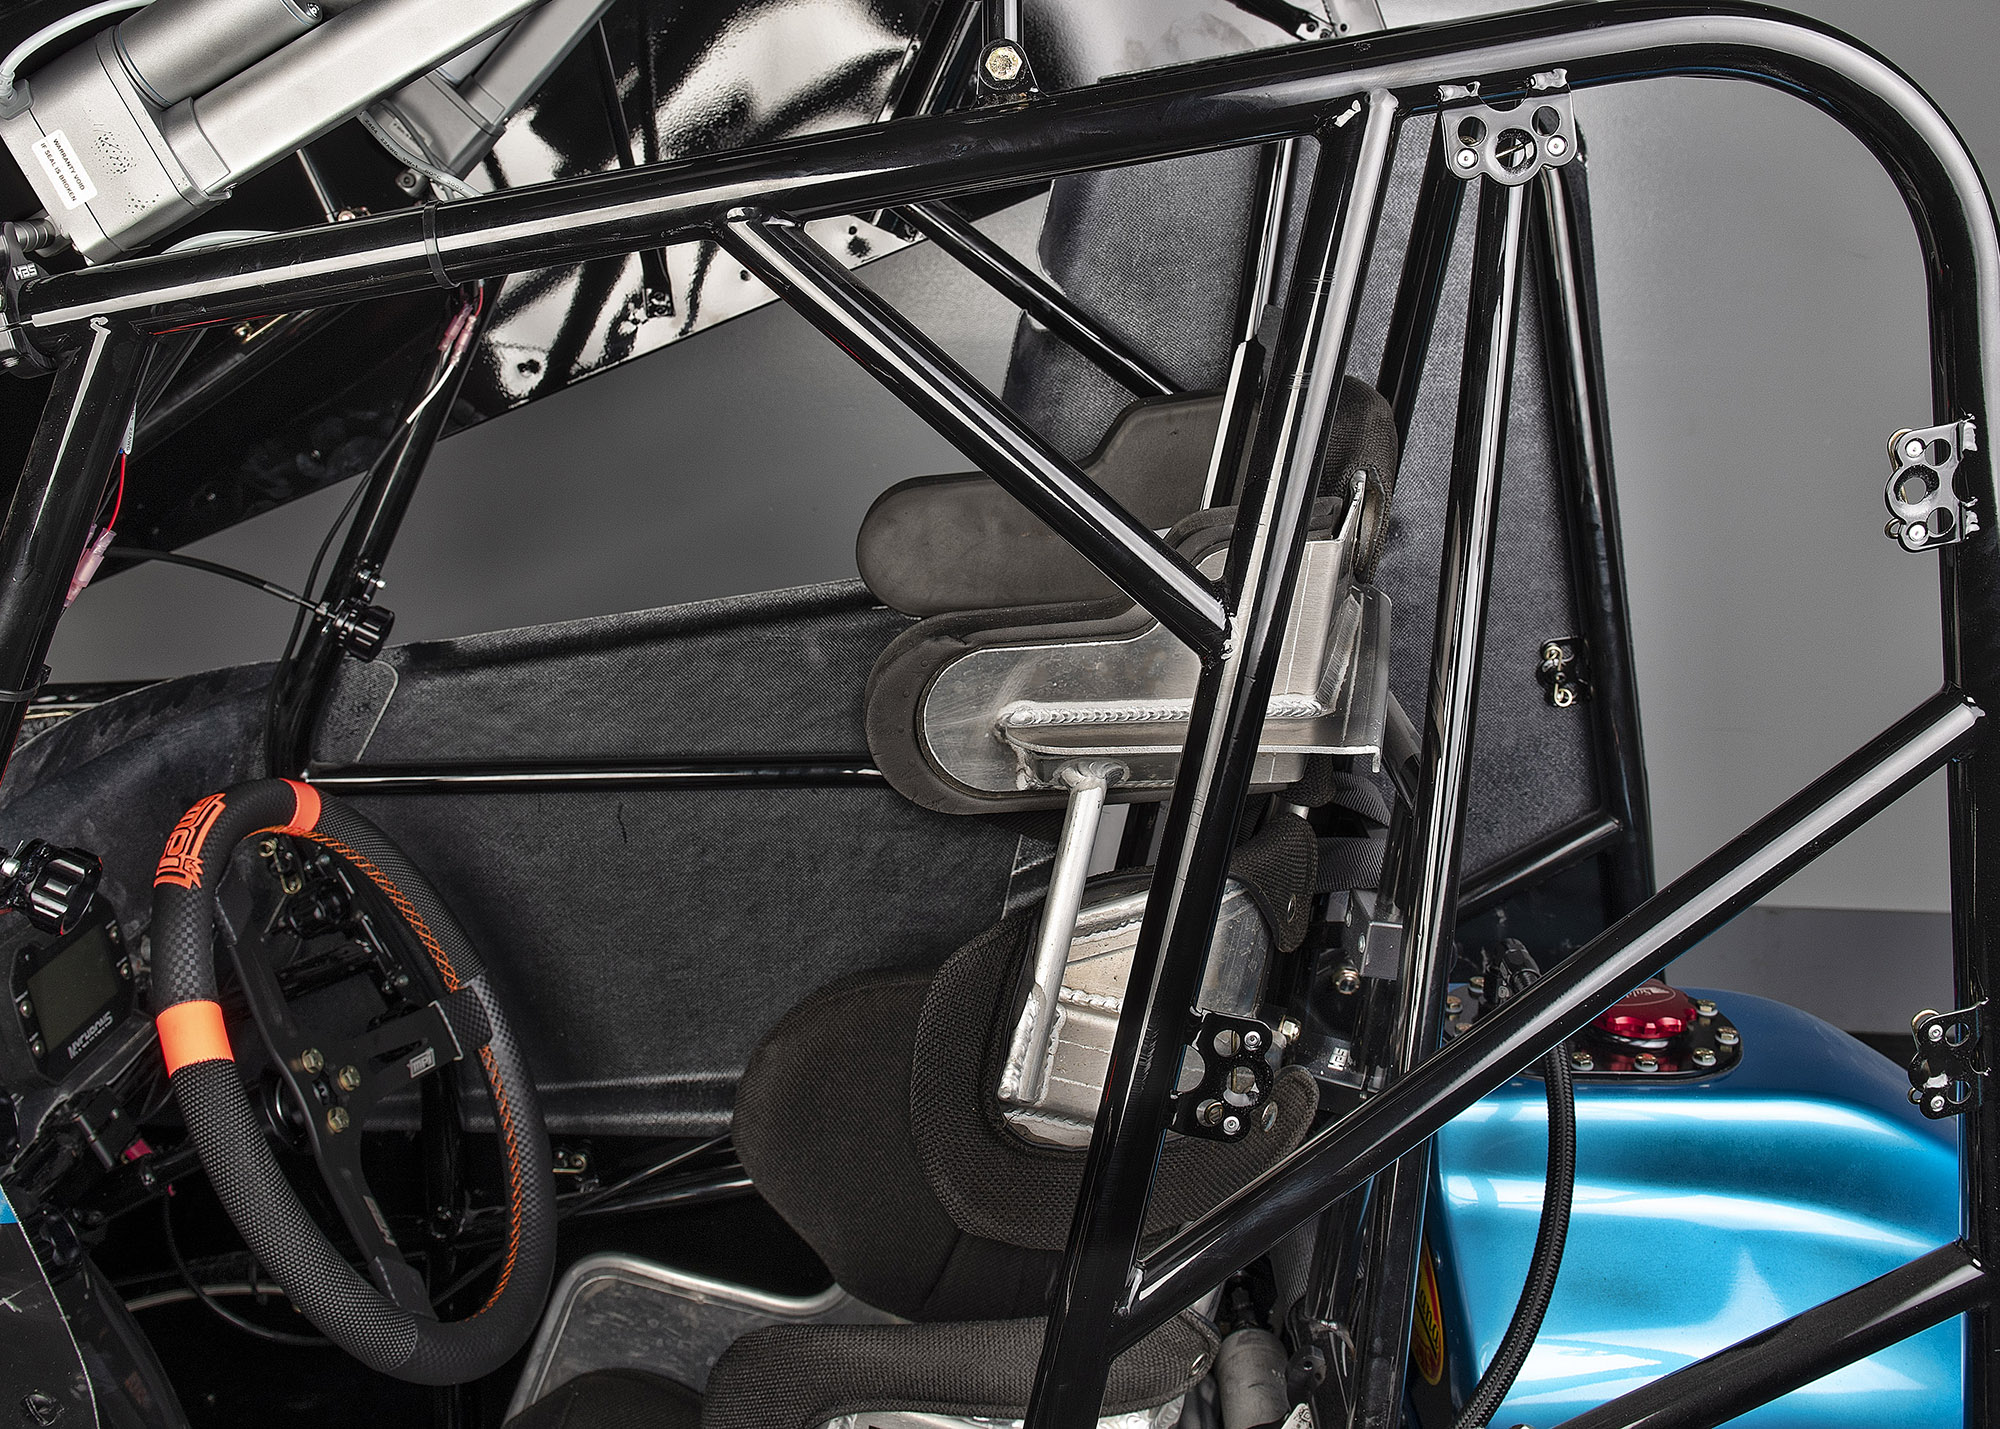 Introduced in 2019, cage gussets provide greater frame integrity. We recommend all Hyper Chassis get updated with these.